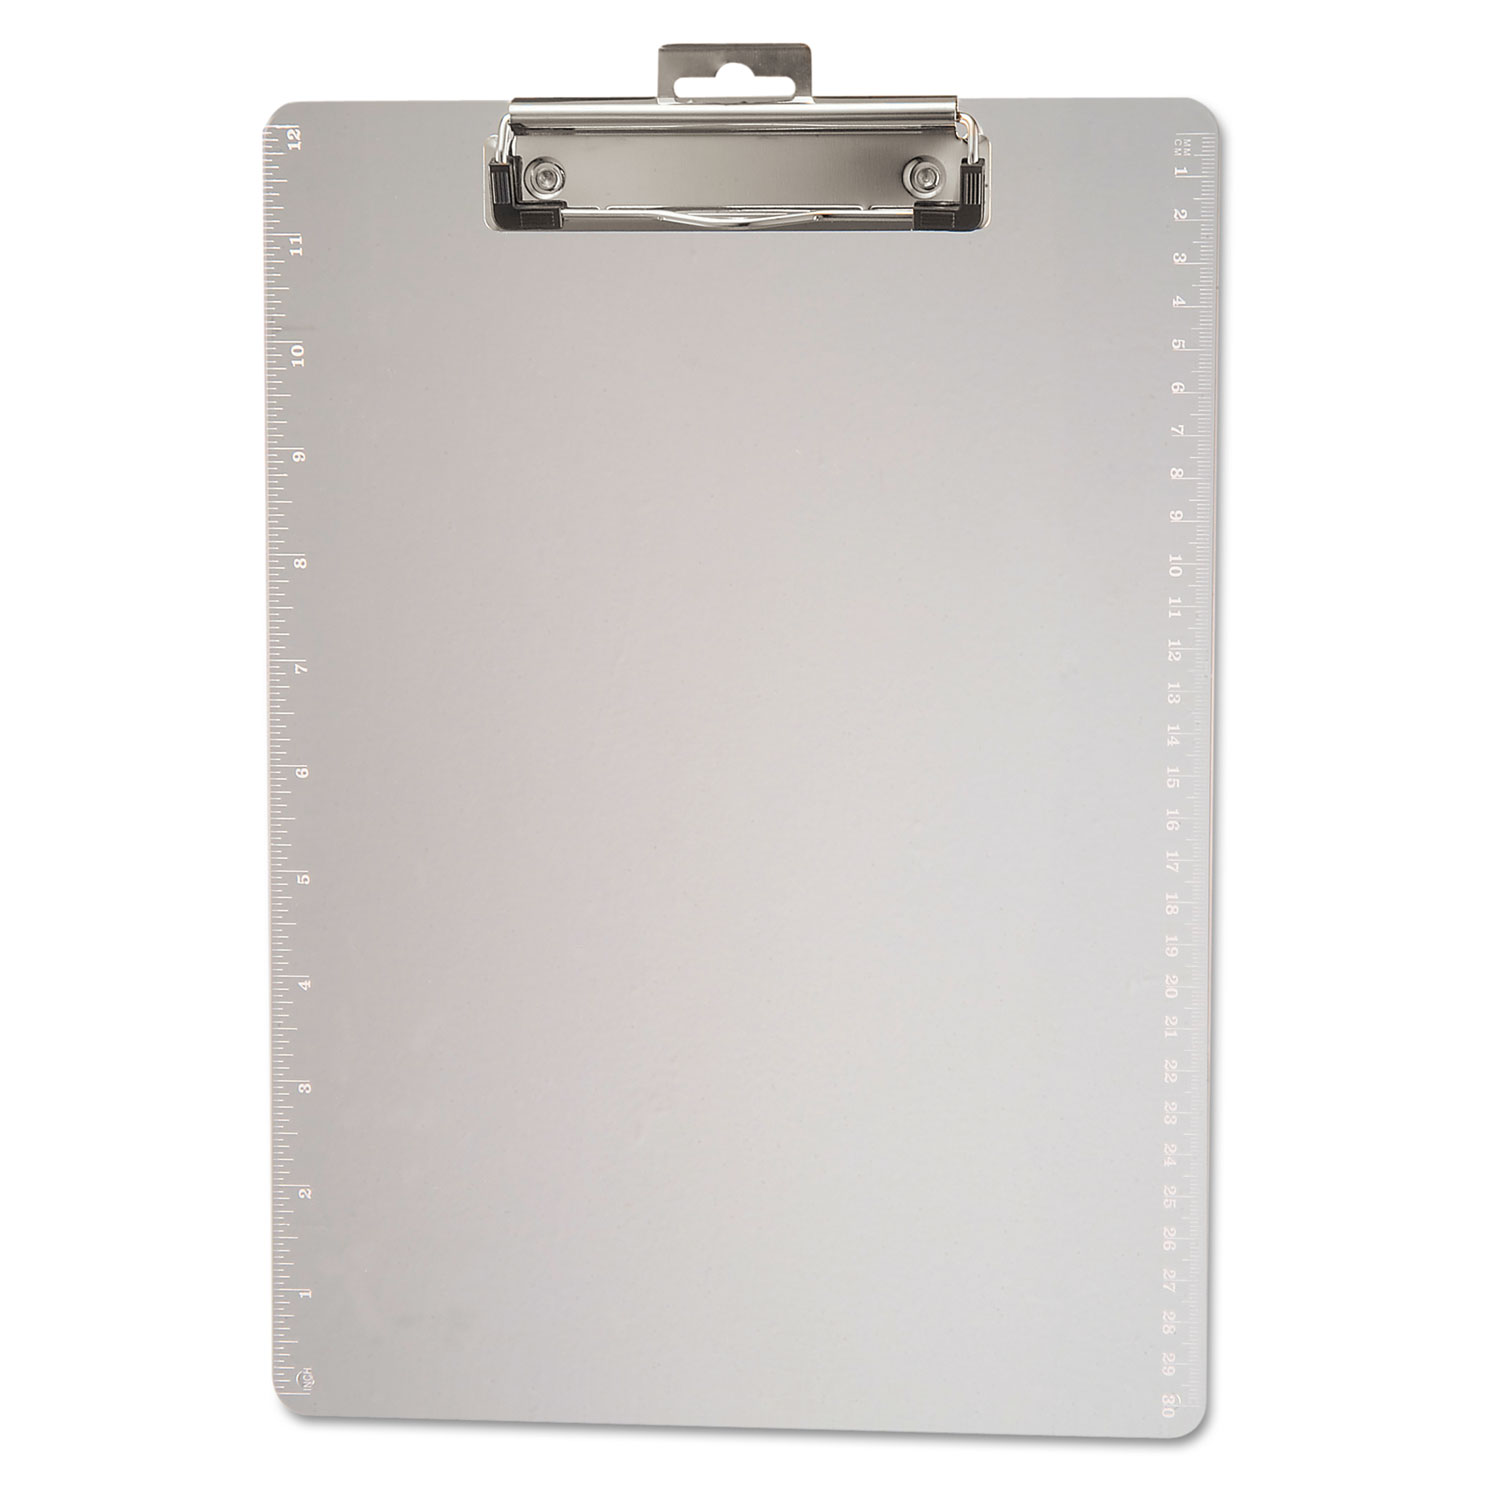  Officemate 83016 Plastic Clipboard, 1/2 Capacity, Holds 8 1/2 x 11, Clear (OIC83016) 